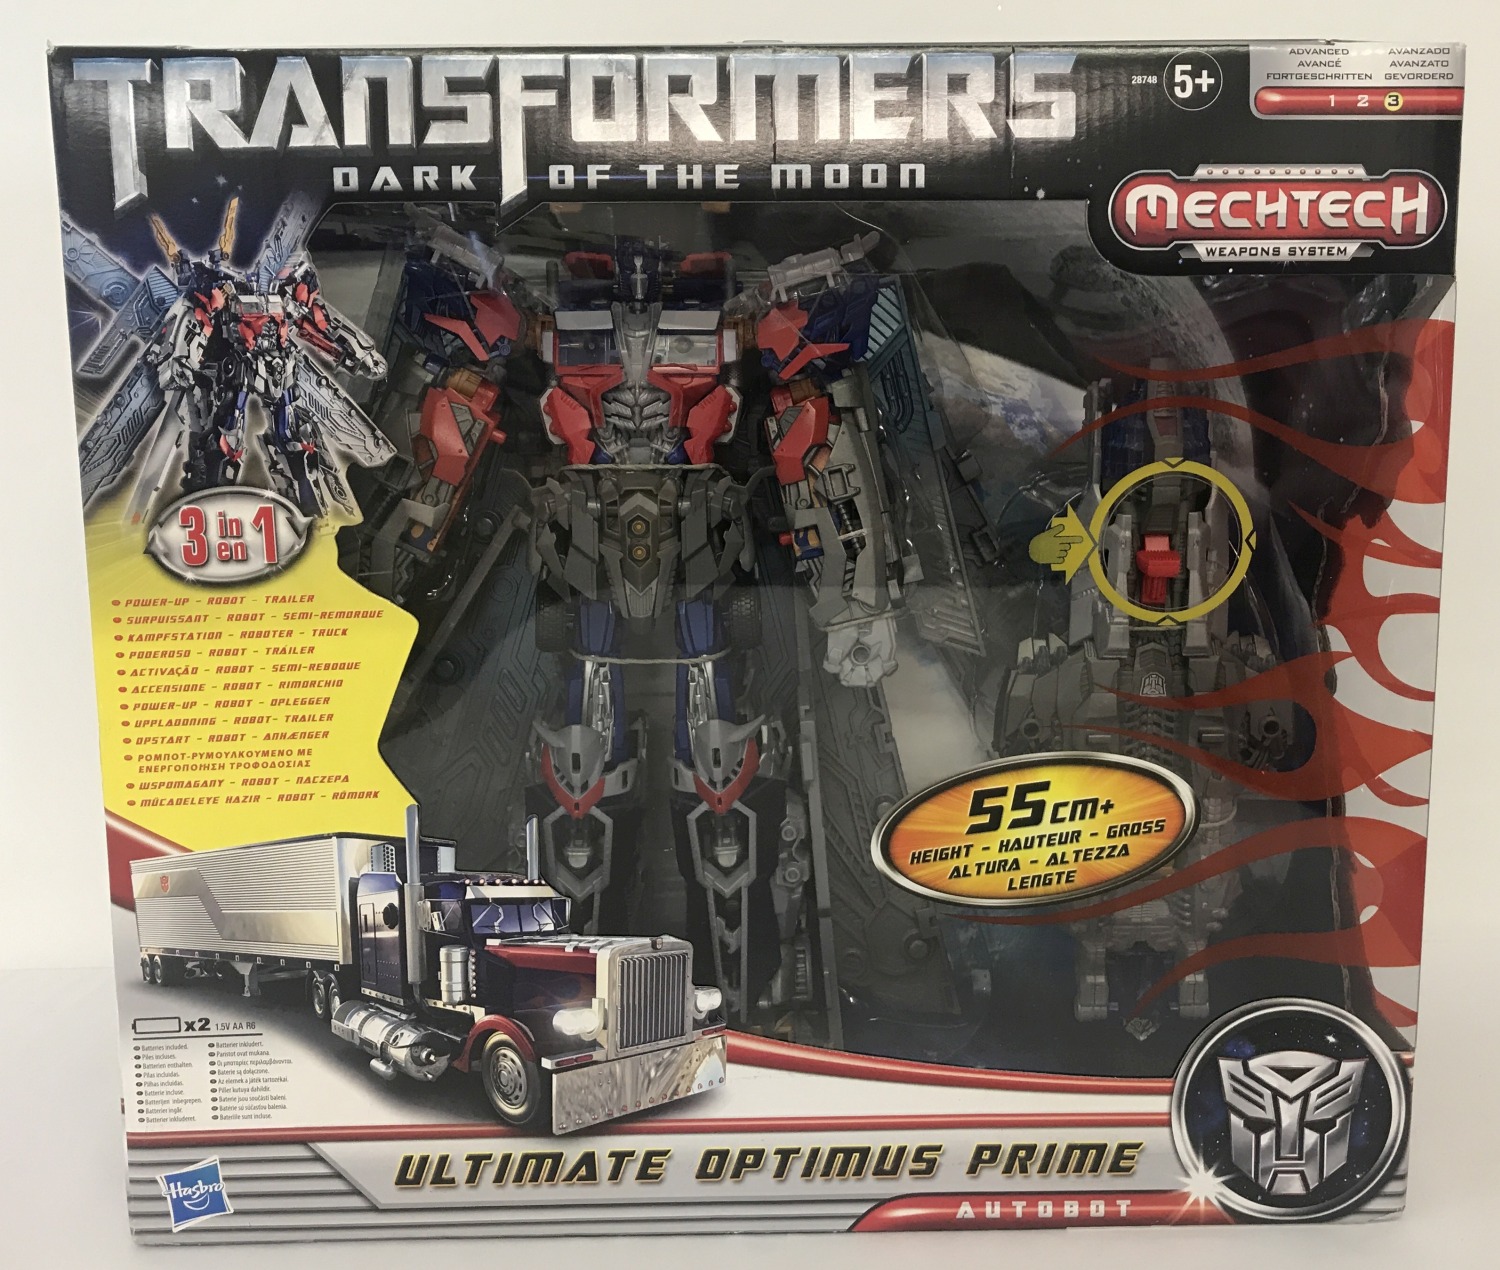 A new boxed (unopened) 2011 Transformers "Dark Side Of The Moon" Ultimate Optimus Prime by Hasbro.